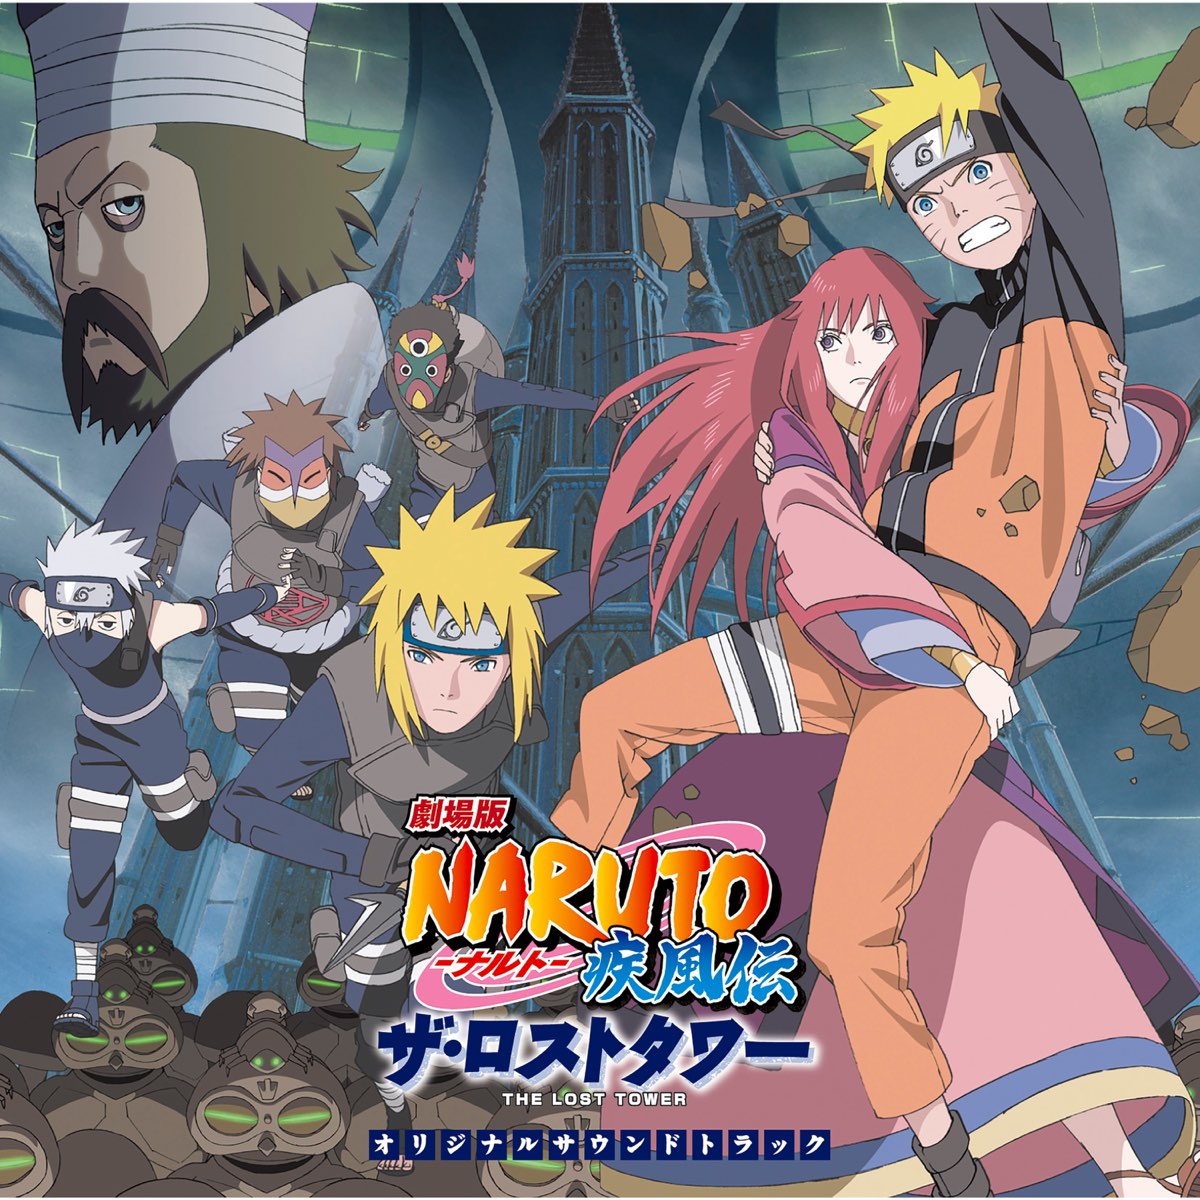 Naruto Shippuden the Movie: The Lost Tower - Sinfilm